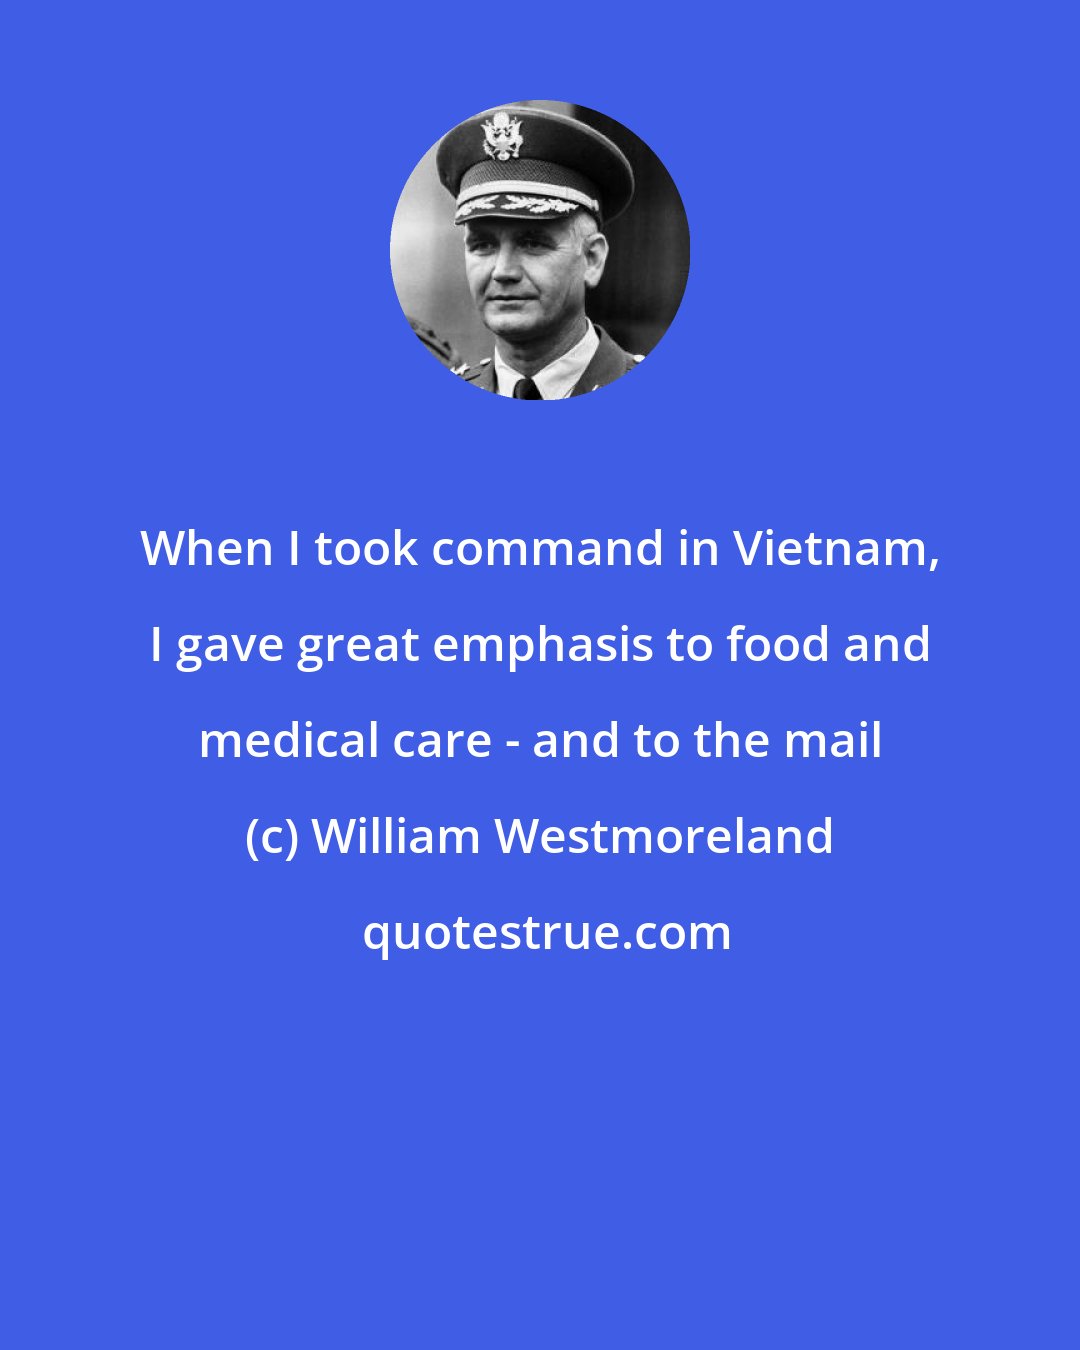 William Westmoreland: When I took command in Vietnam, I gave great emphasis to food and medical care - and to the mail